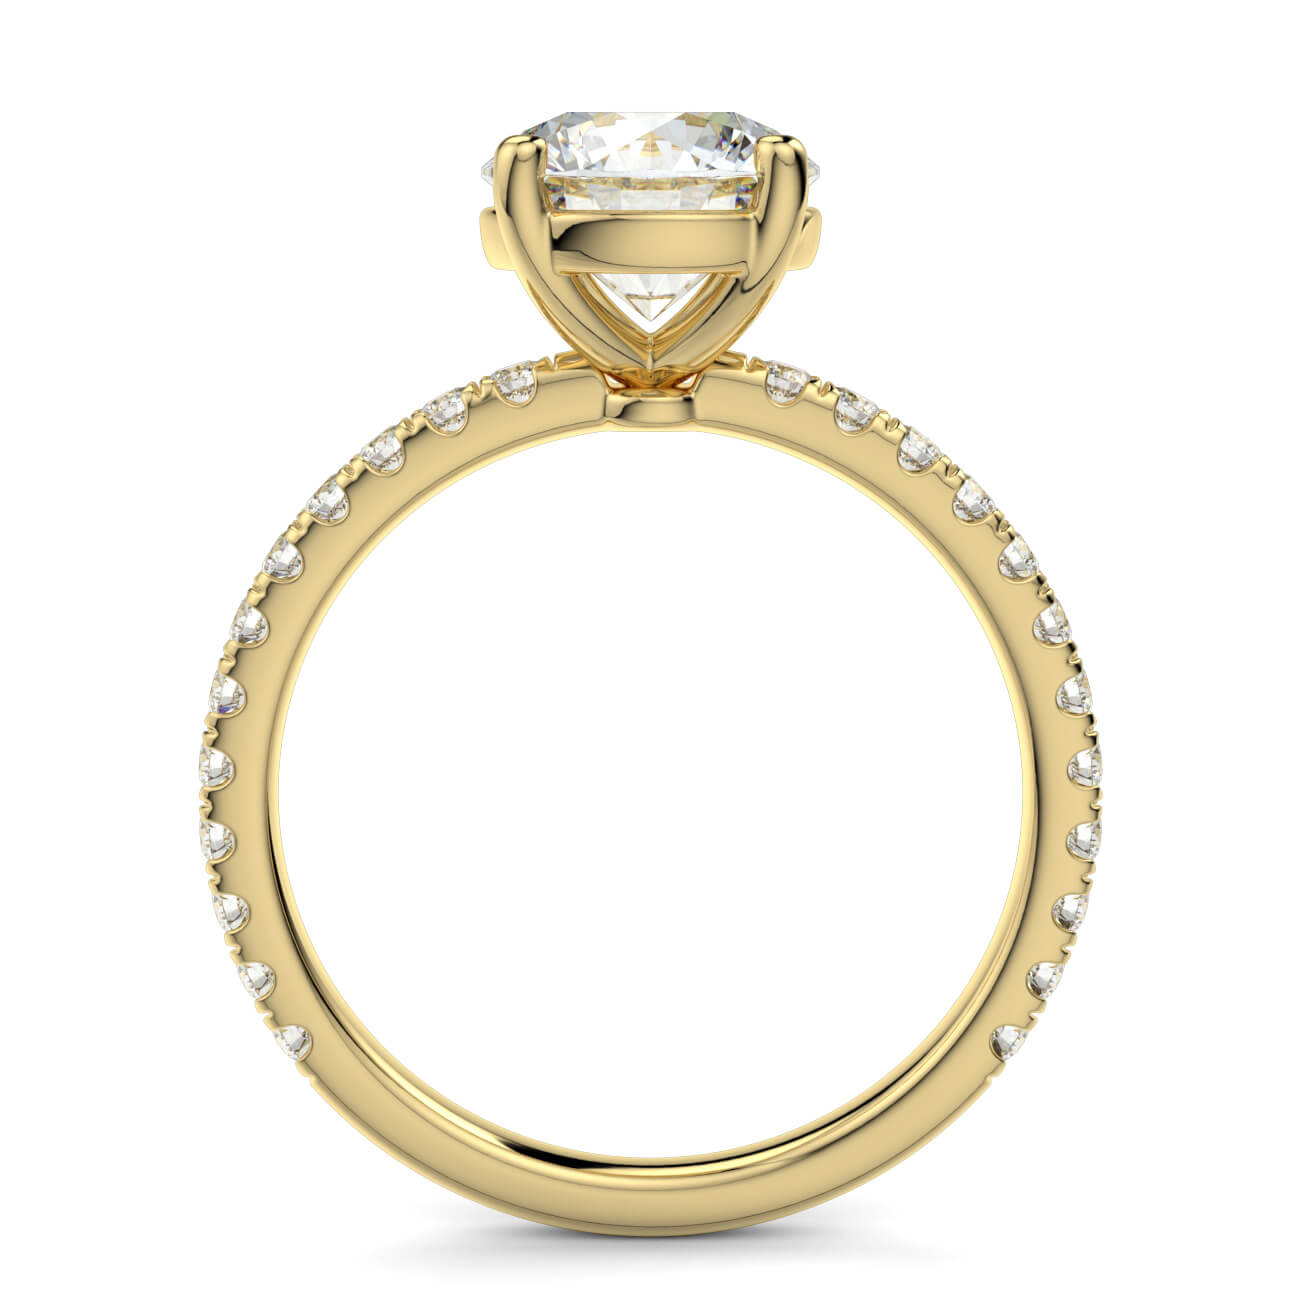 Delicate ‘Liat’ 4 Claw Diamond Engagement Ring in 18k Yellow Gold – Australian Diamond Network